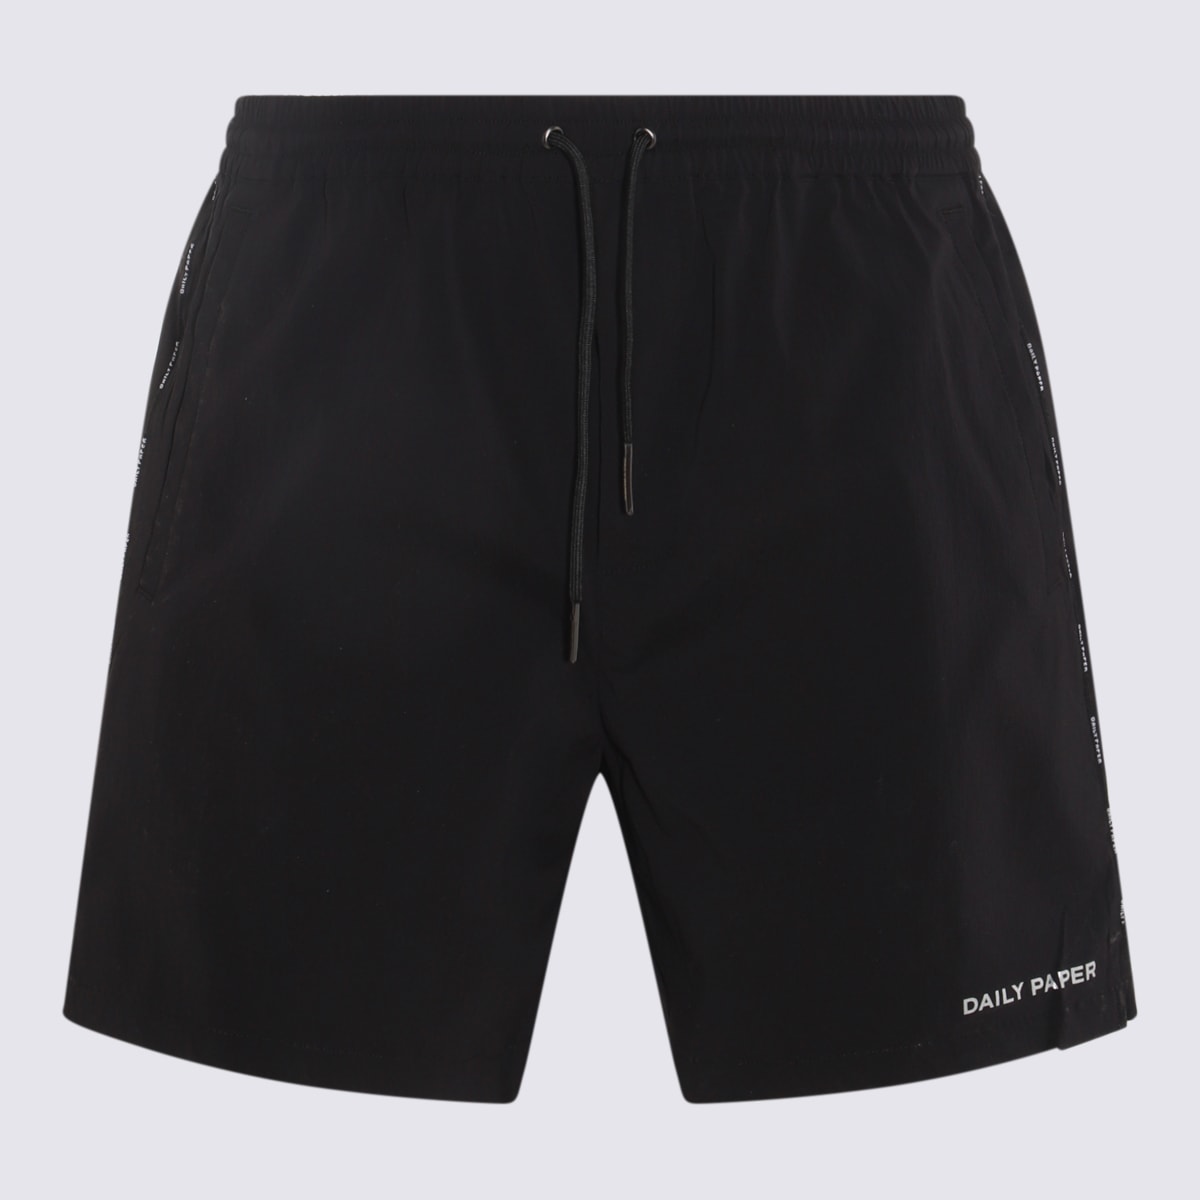 Daily Paper Black Track Shorts